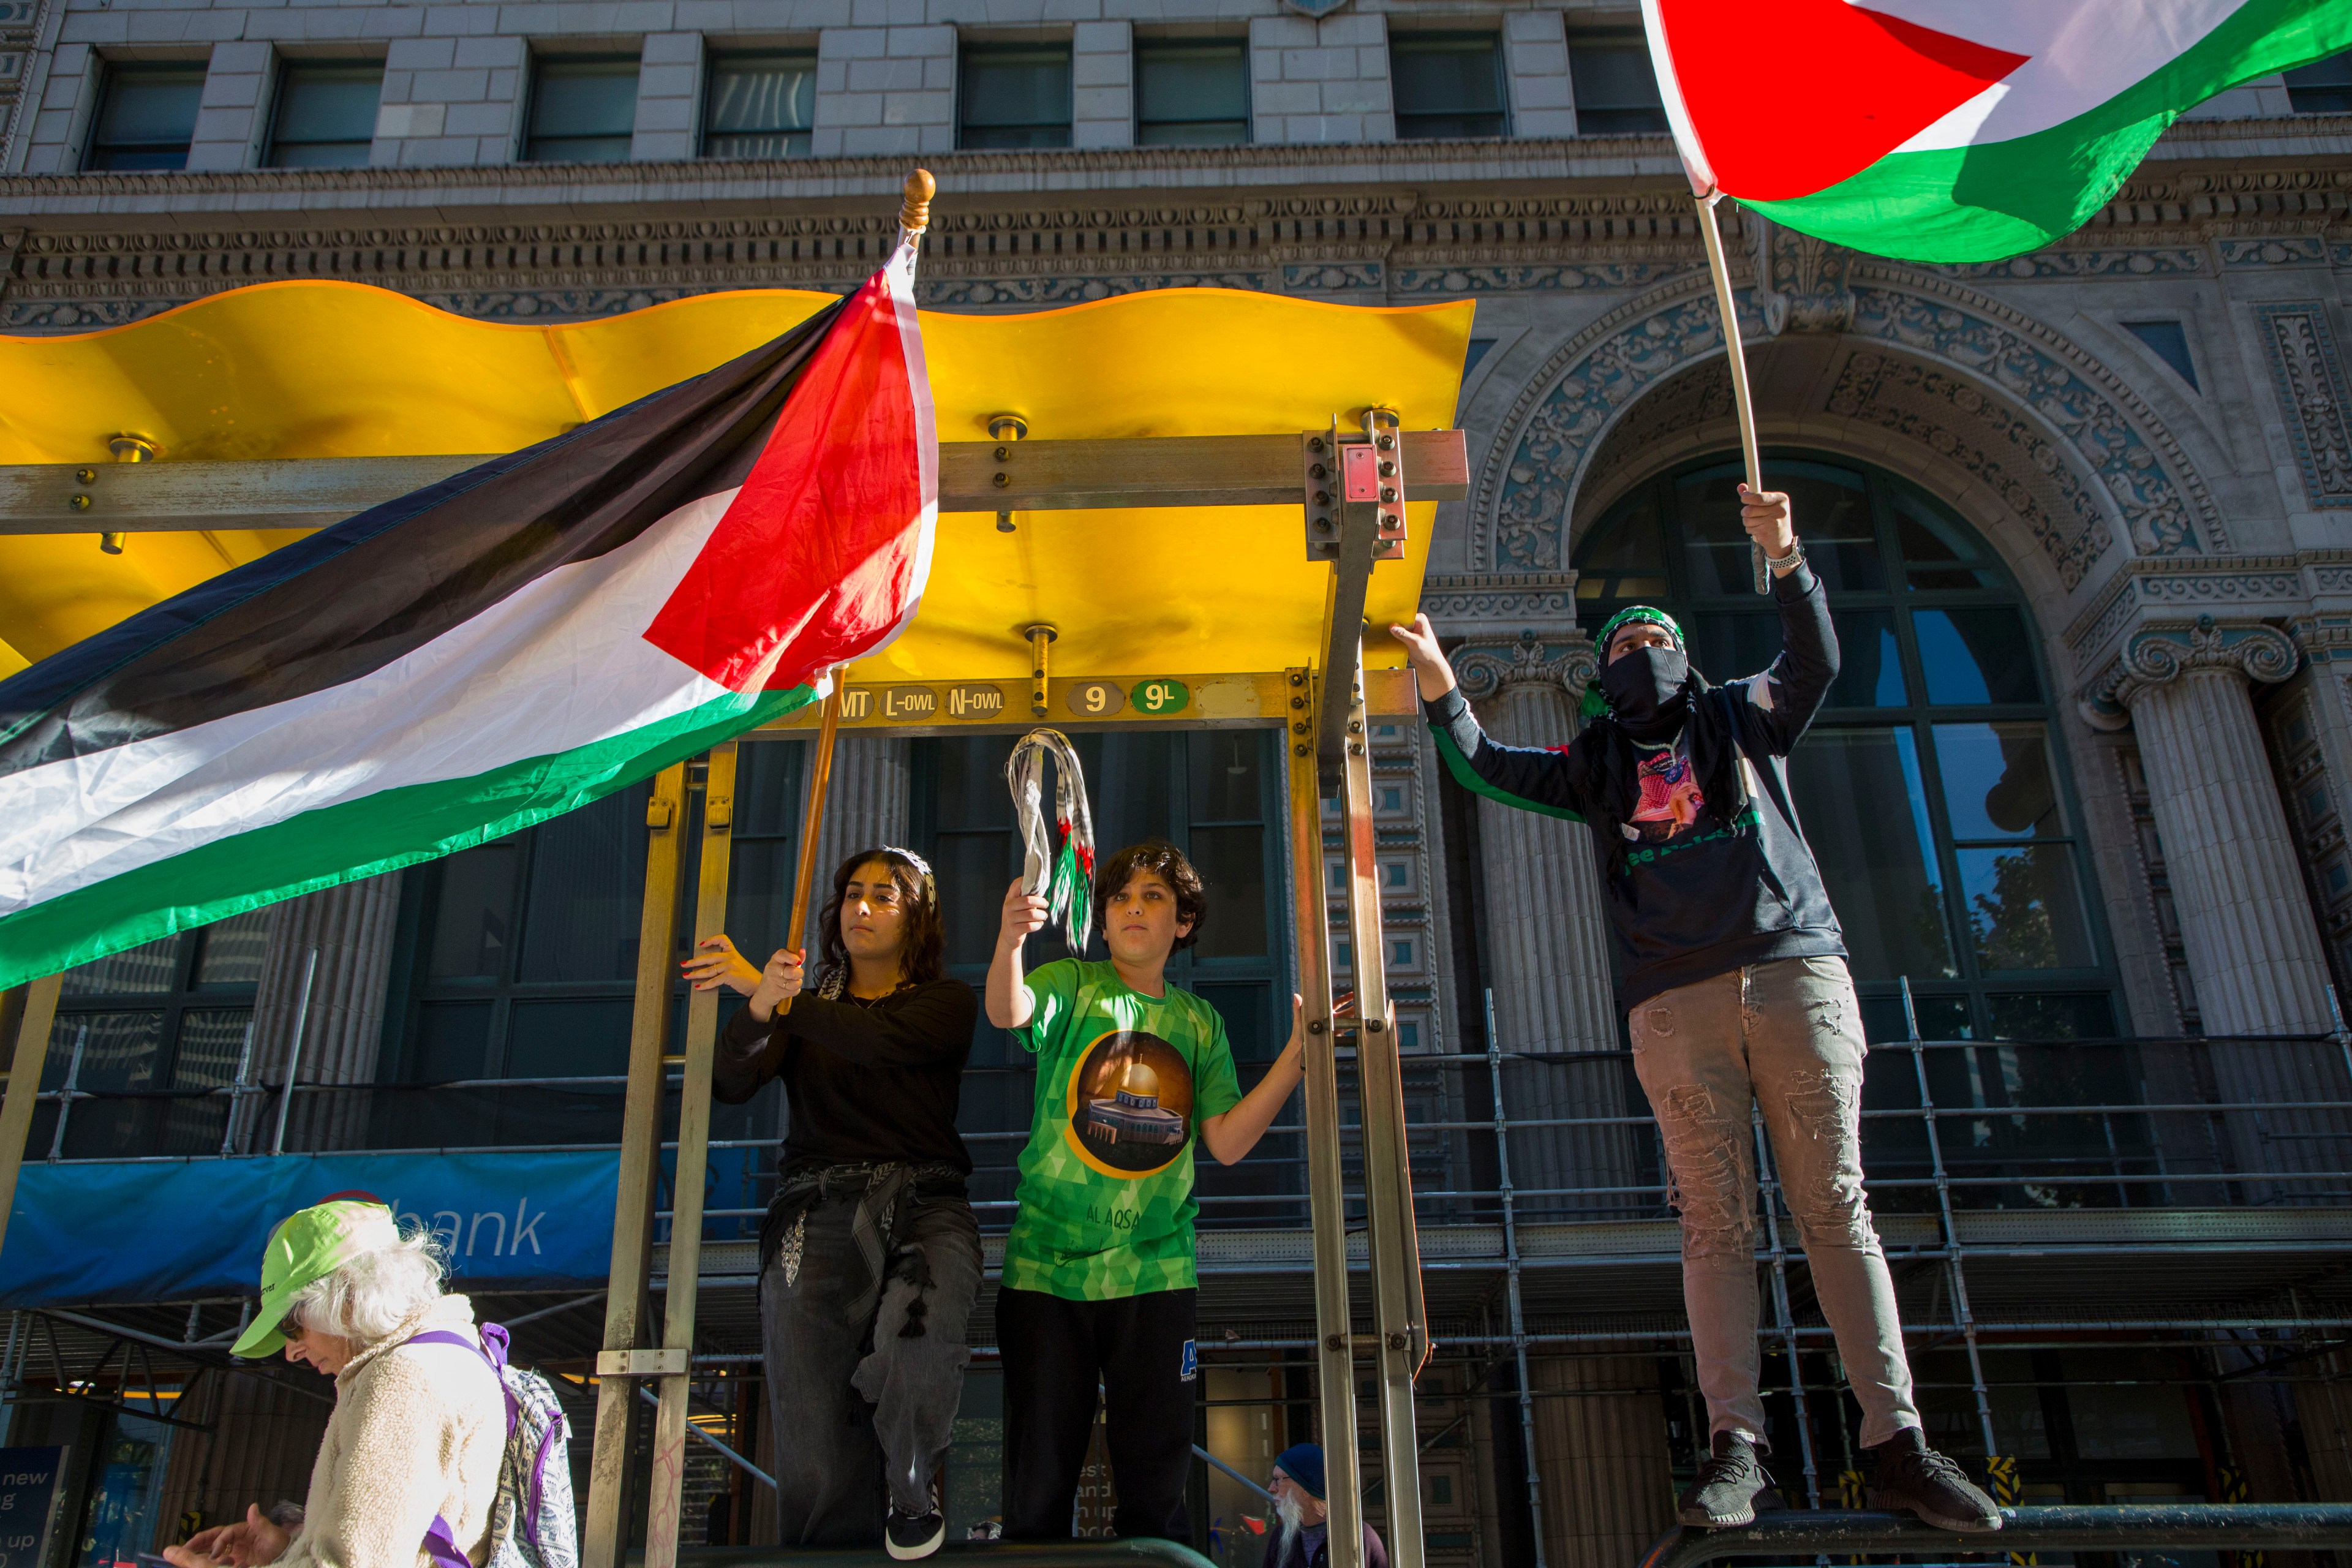 During the No 2 APEC march, three individuals stood atop a bus stop waving the Palestinian flag.